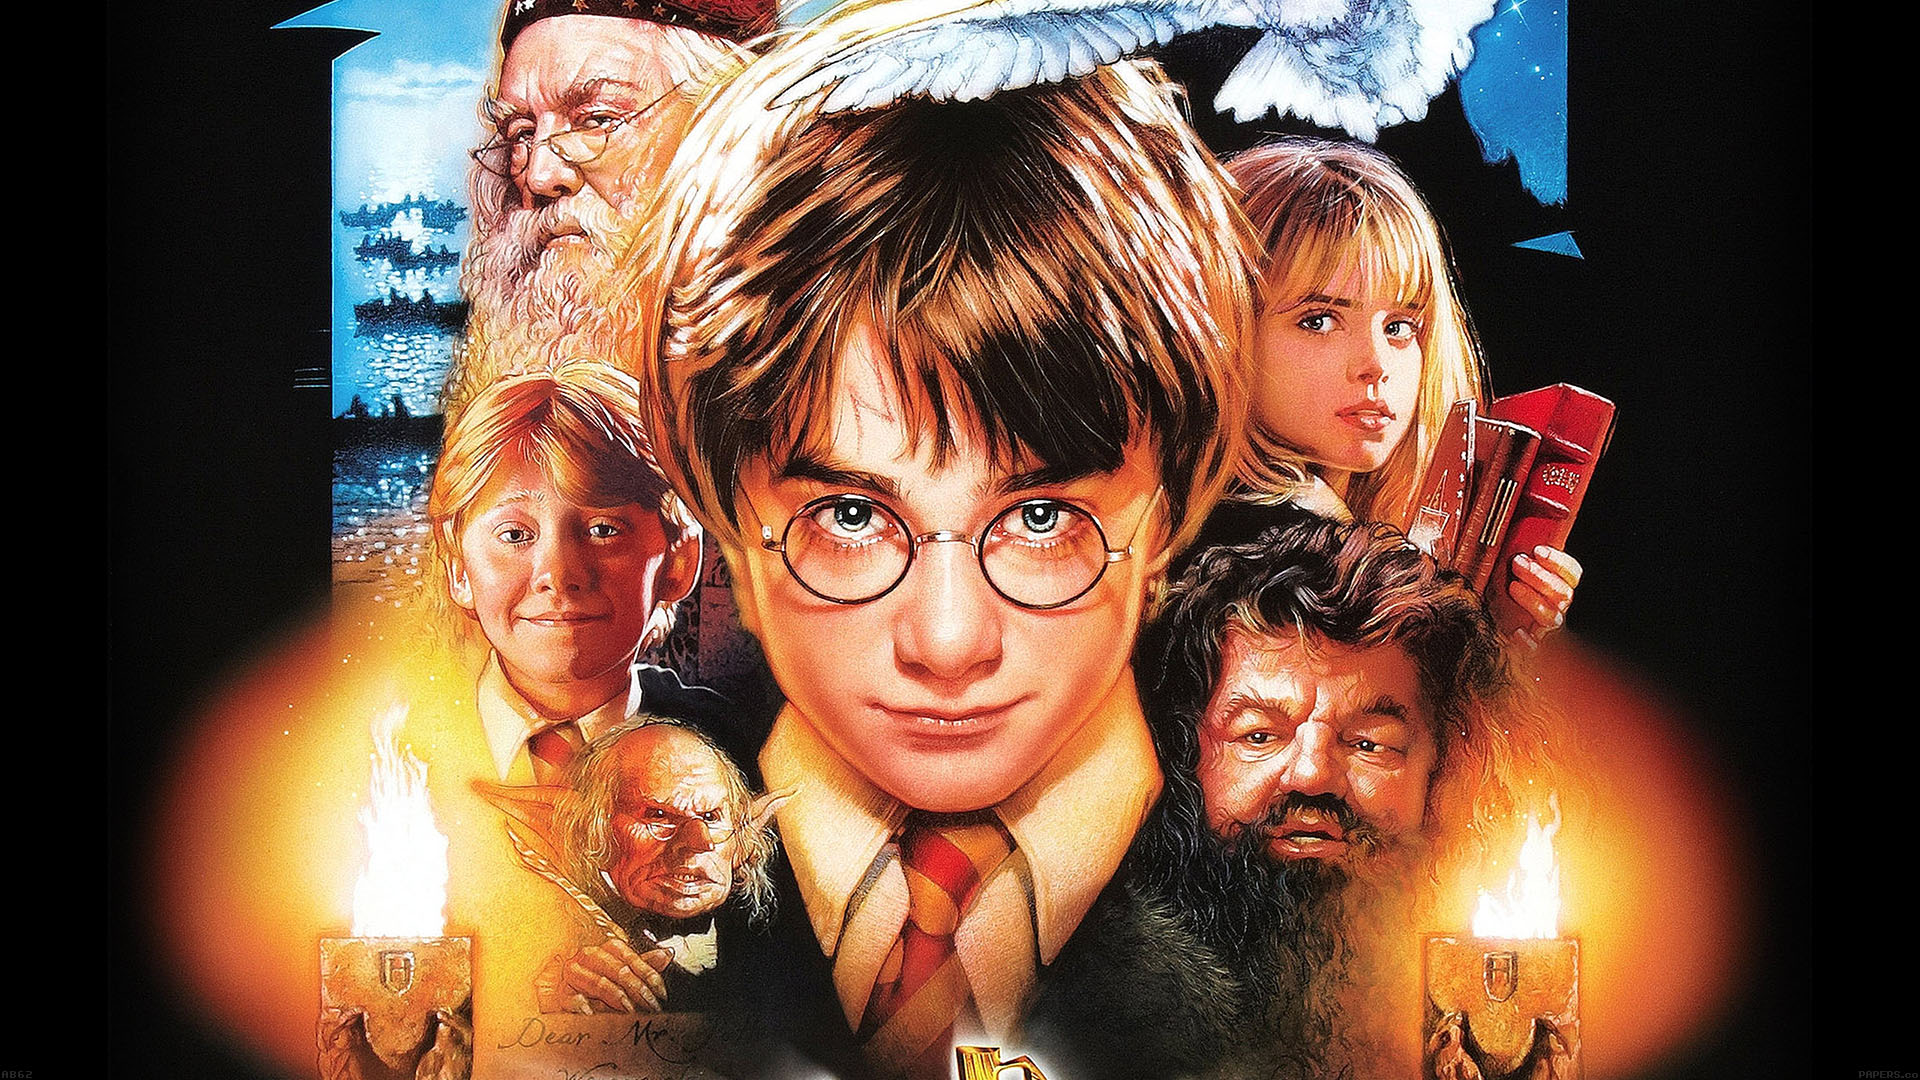 Character Movie Harry Potter - HD Wallpaper 